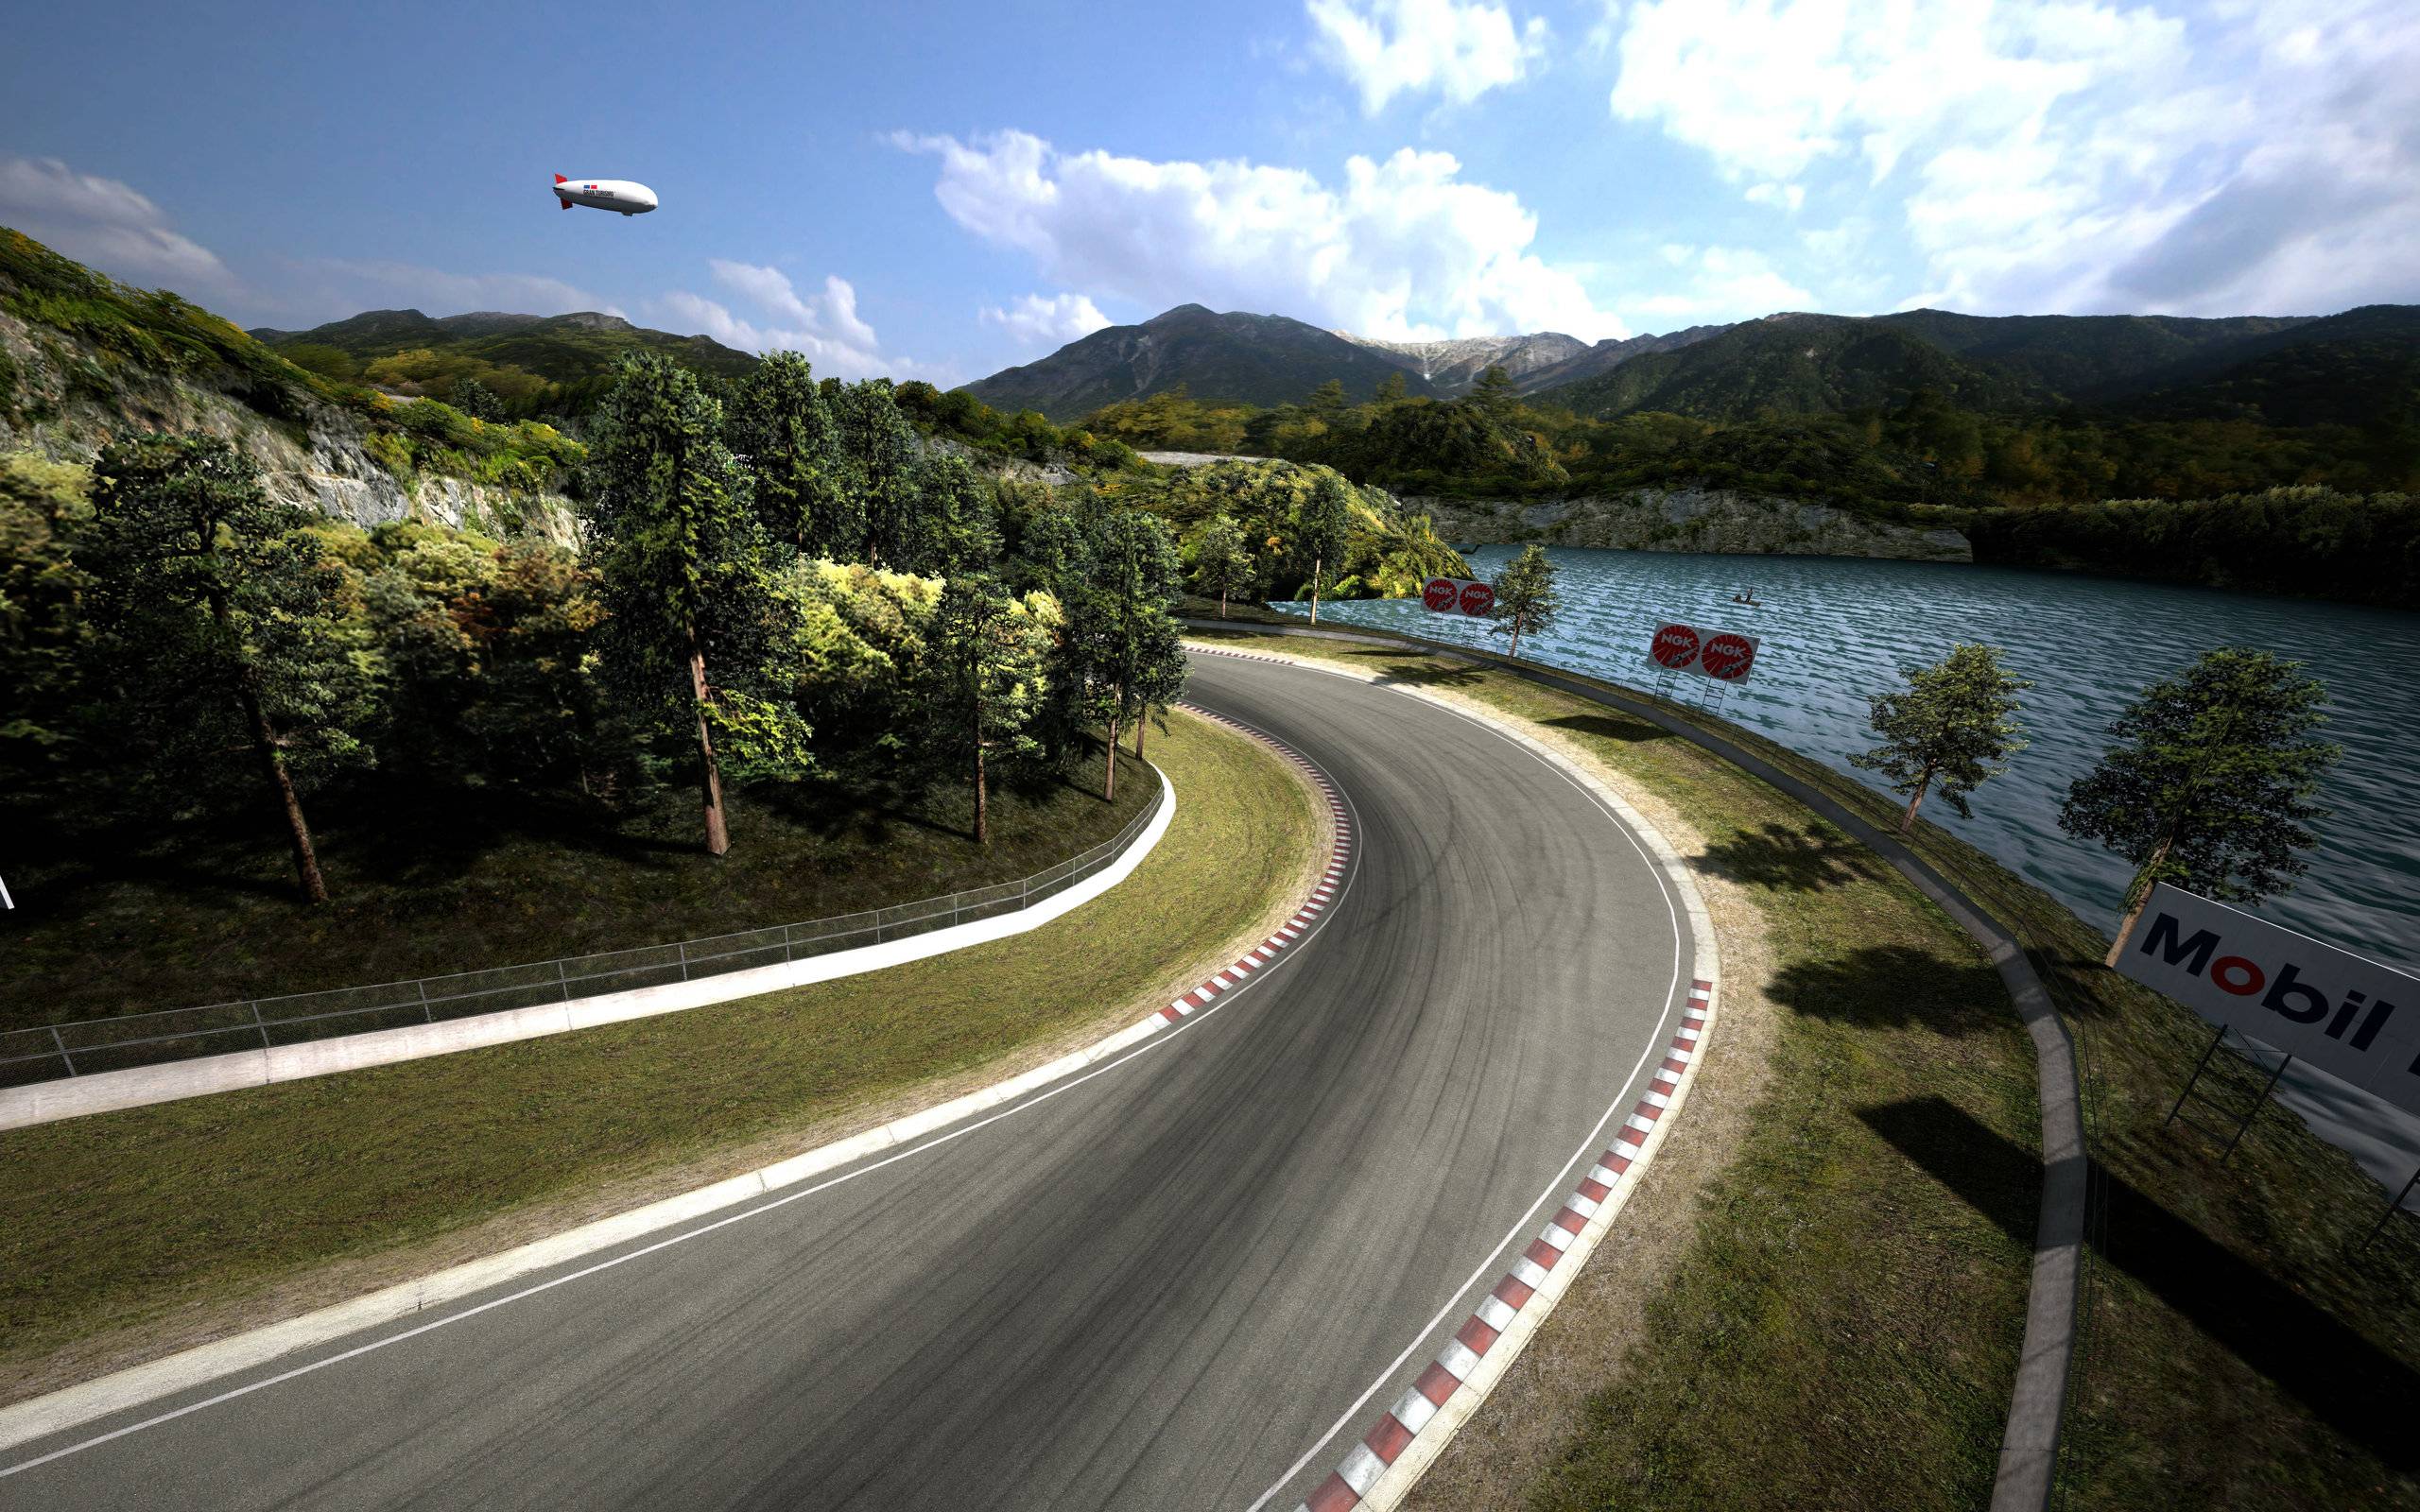 Free Download Racing Track Wallpaper in 2560x1600 resolutions